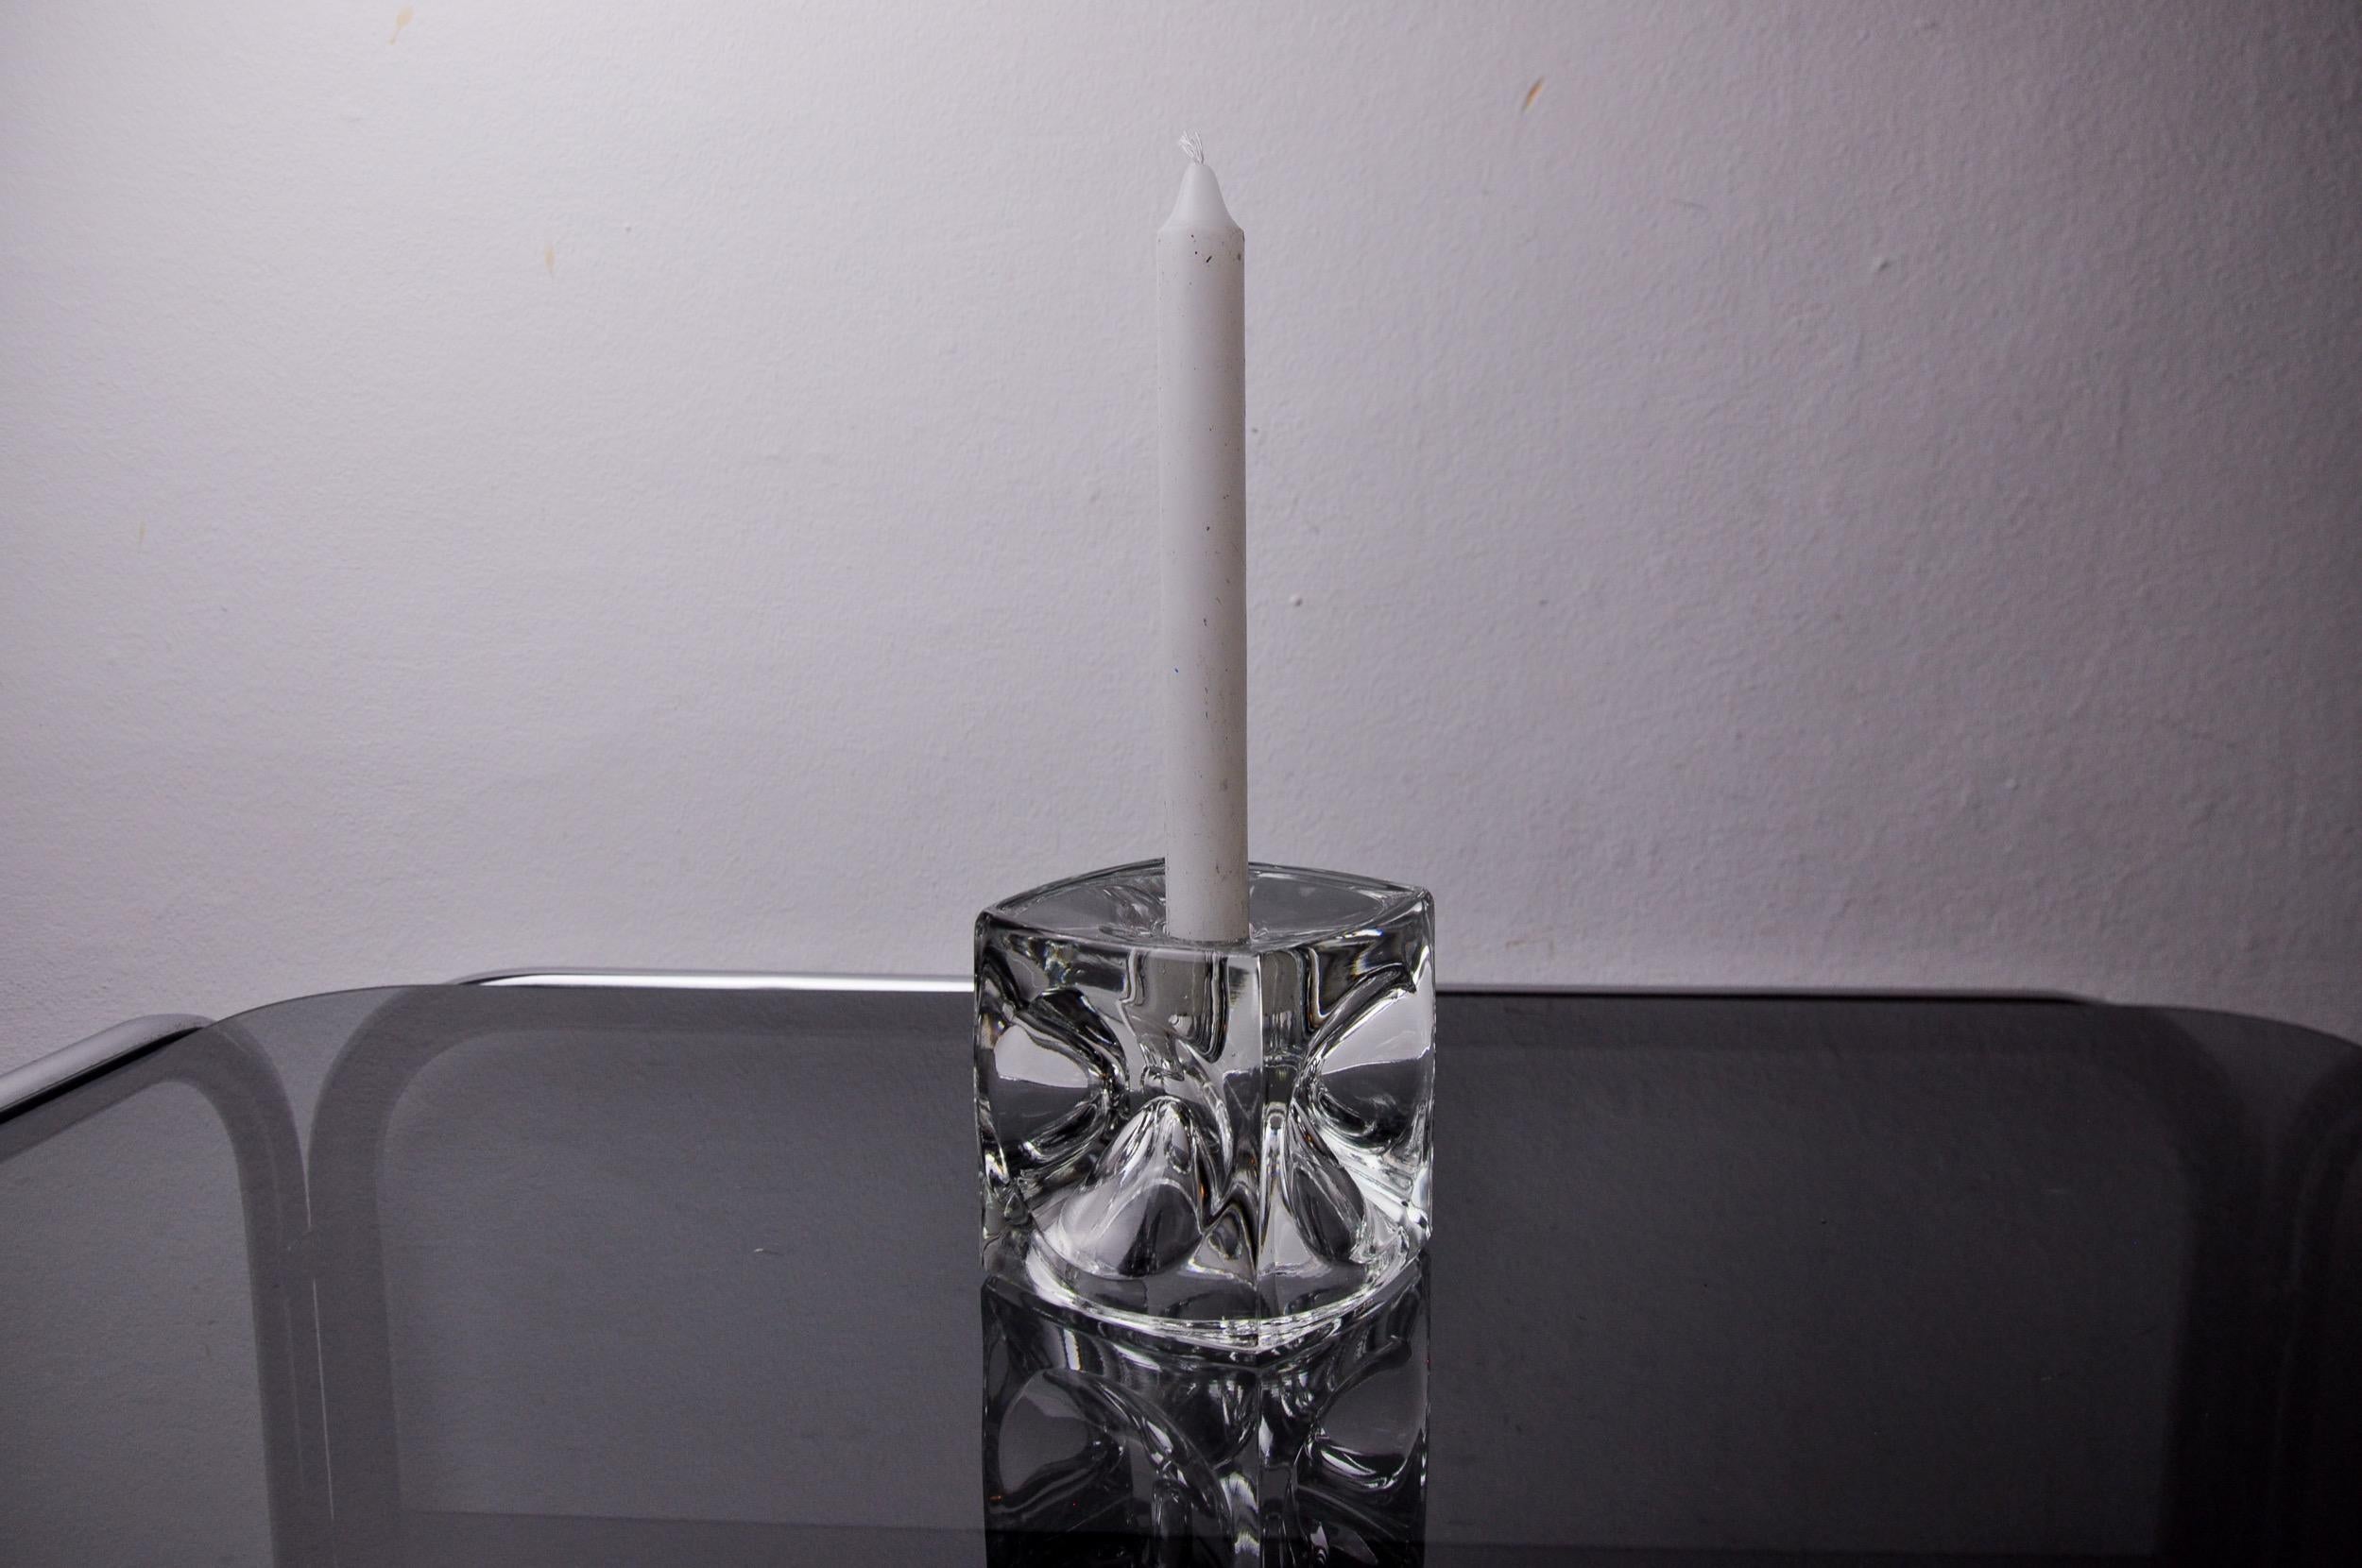 Superb icicle candle holder by Peill & Putzler designed and produced in Germany in the 1970s. Blown glass structure that can accommodate a candle. Superb designer object that will decorate your interior wonderfull ref: 1058.